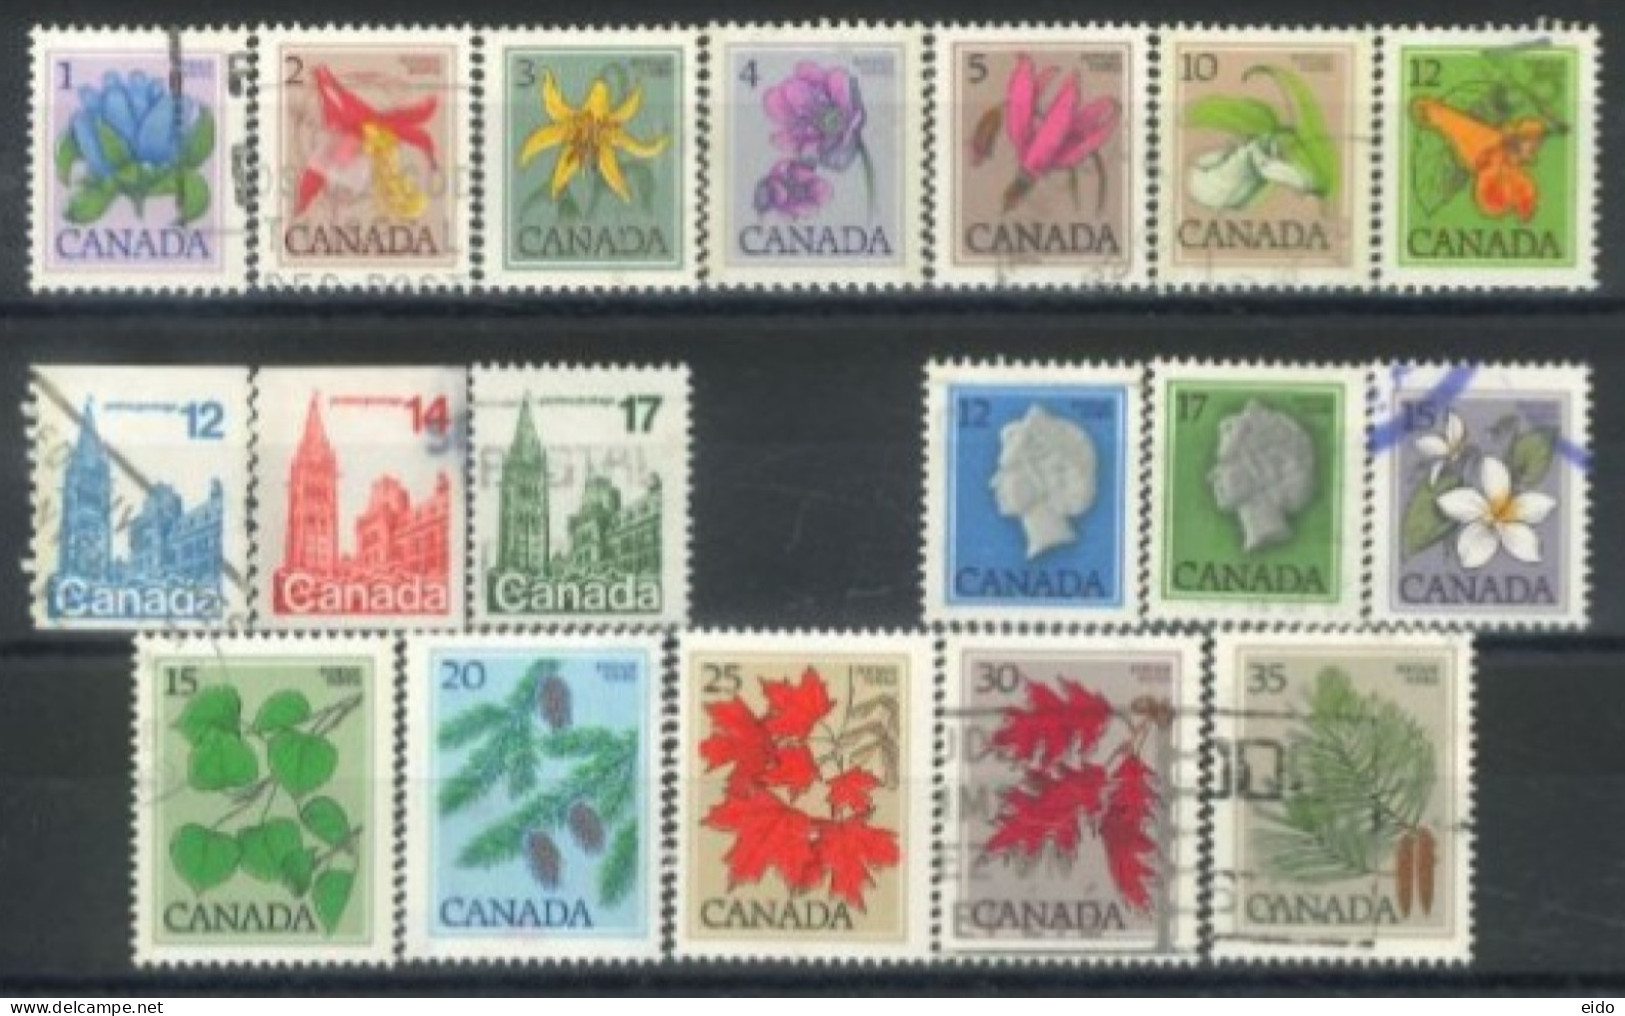 CANADA - 1977, QUEEN ELIZABETH II, HOUSE OF PARLIAMENT, FLOWERS & LEAVES STAMPS SET OF 18, USED. - Oblitérés